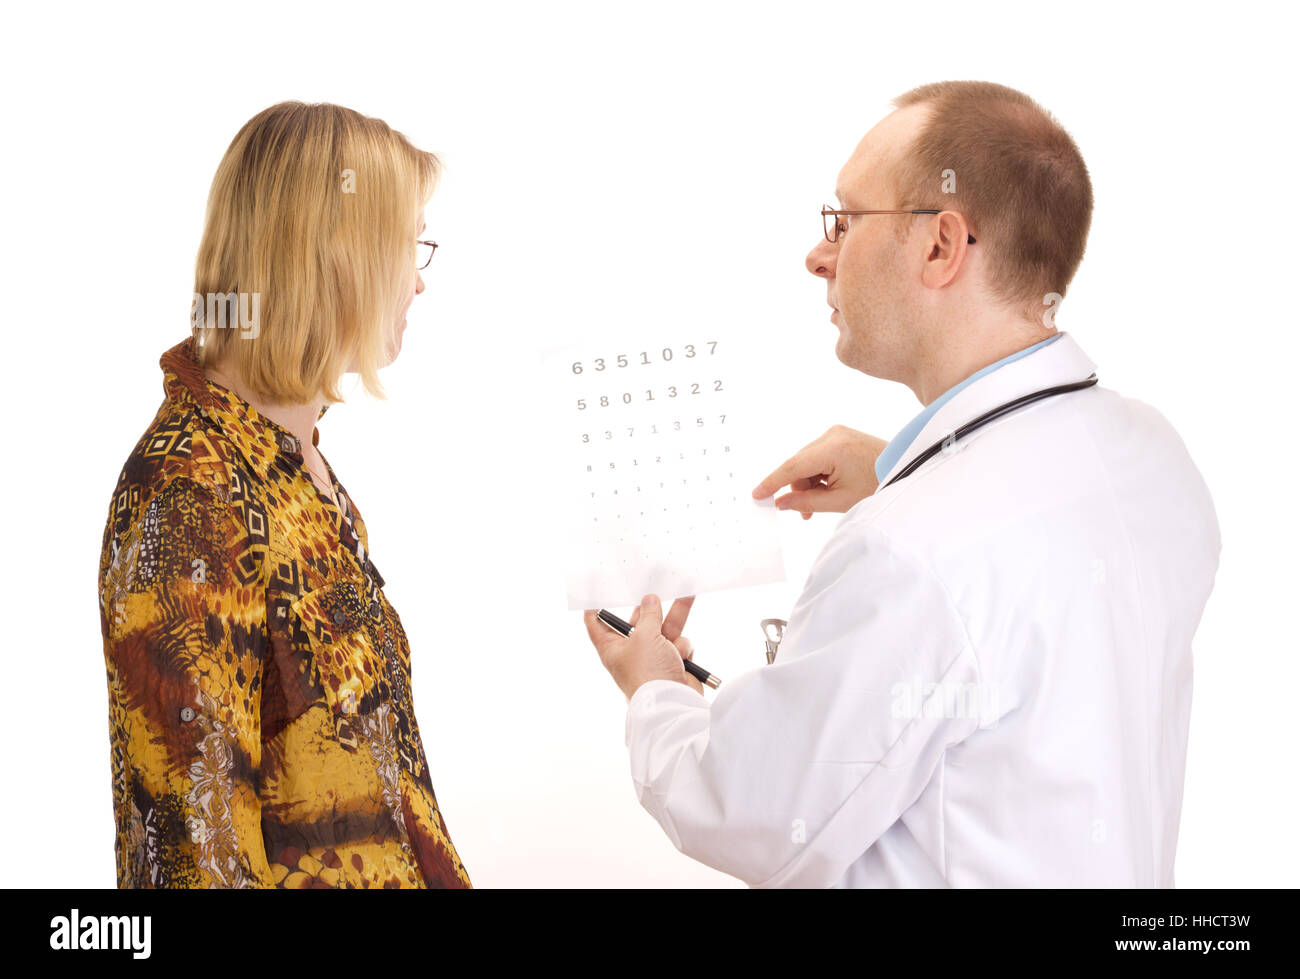 doctor, physician, medic, medical practicioner, woman, humans, human beings, Stock Photo